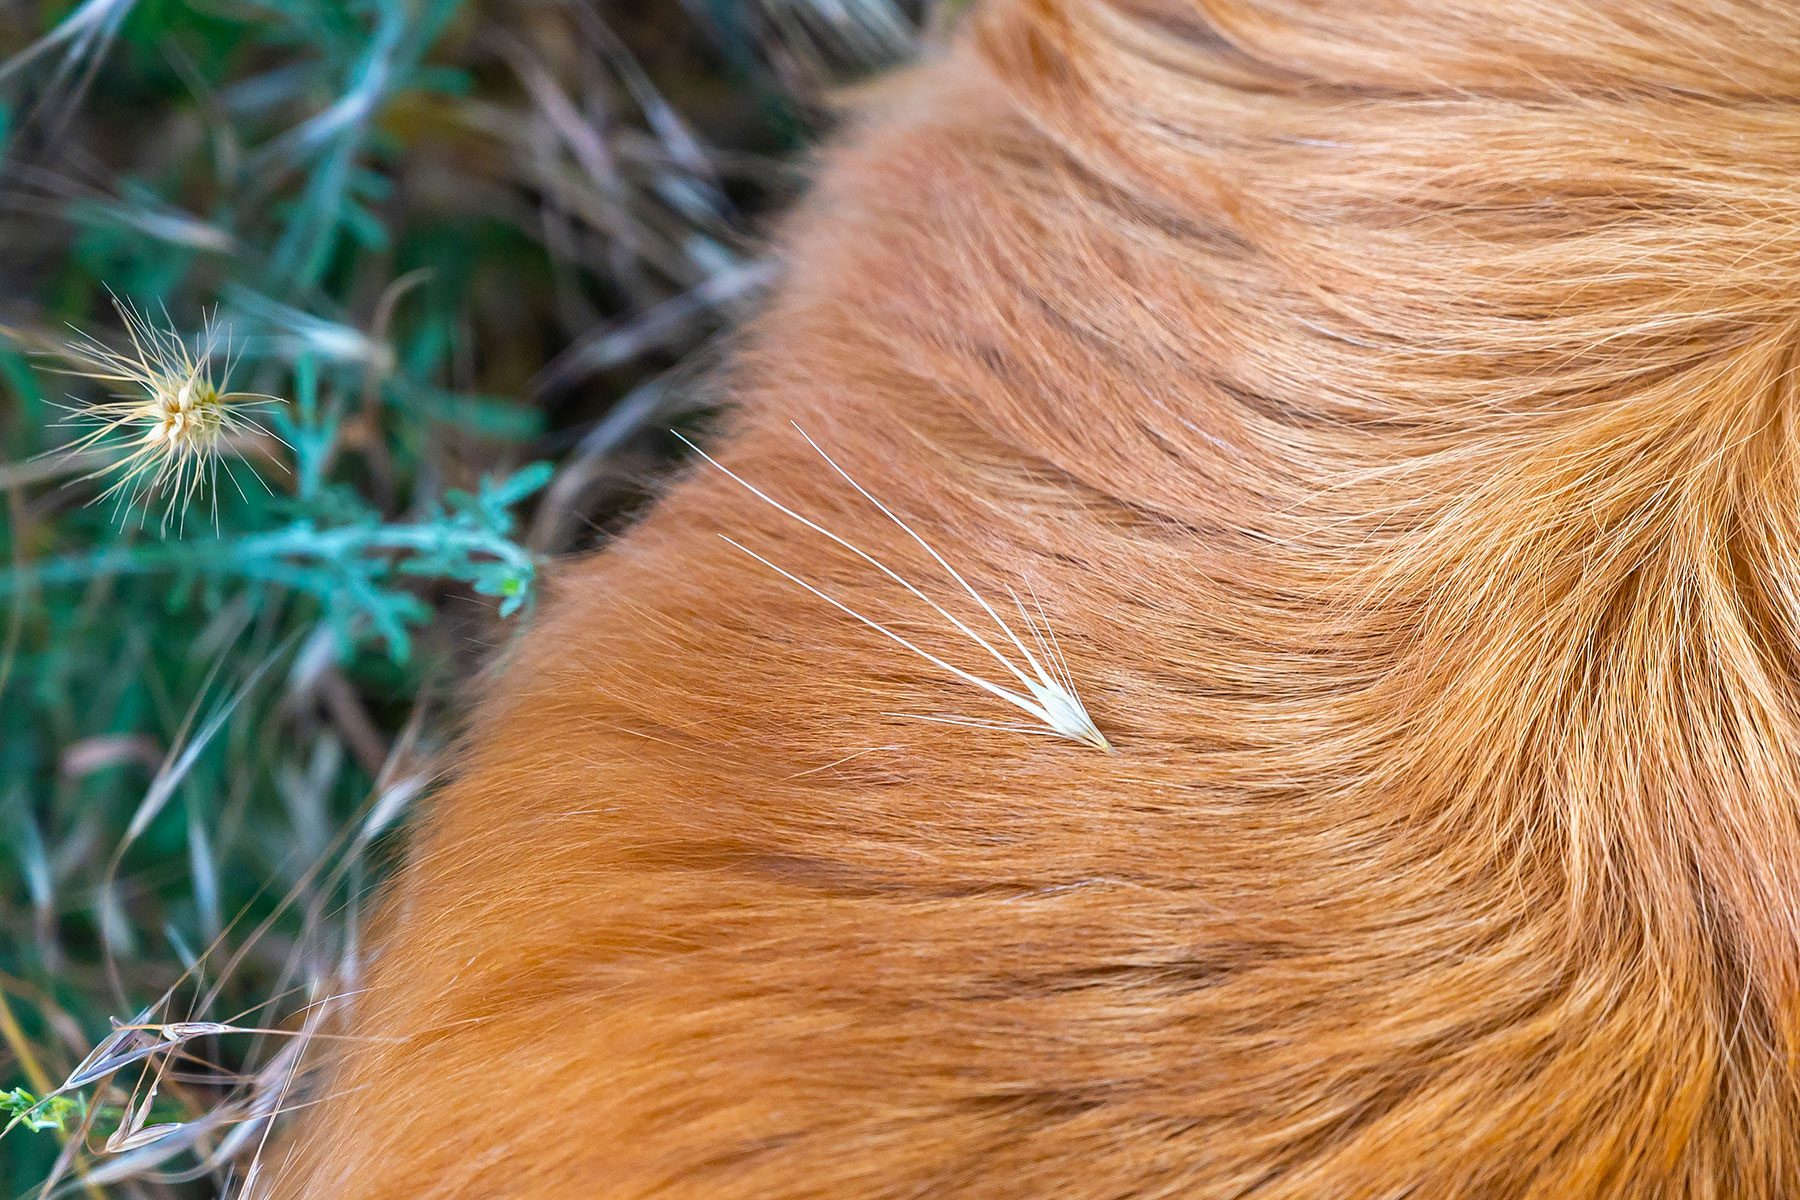 Dried spike of foxtail grass in the red hair of a long-haired dog